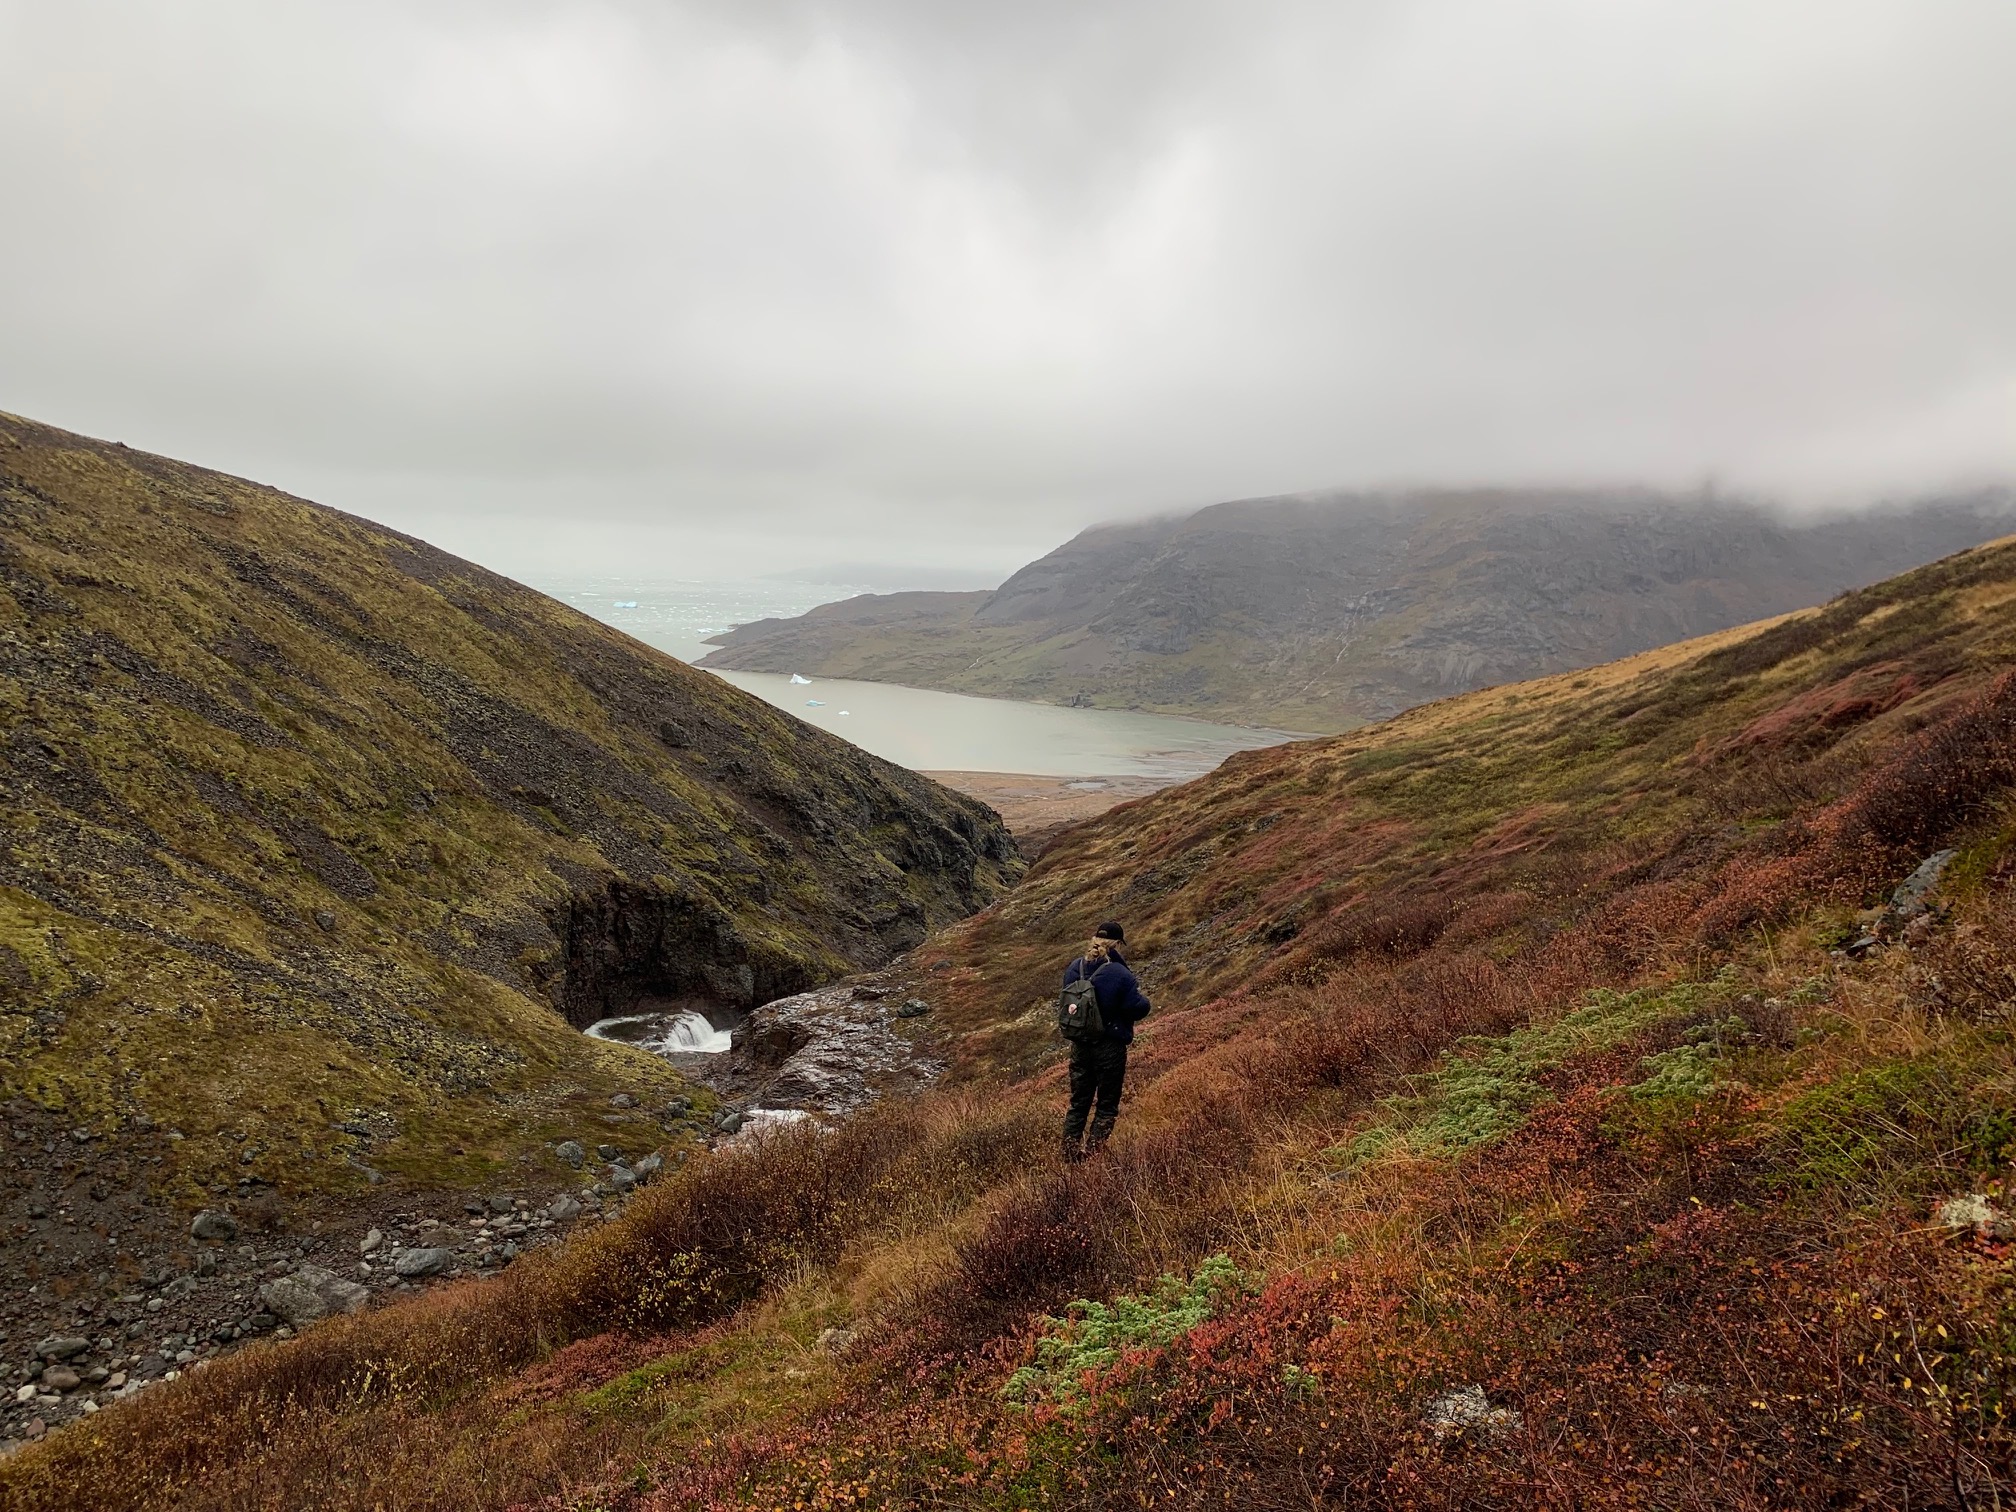 A lone hiker stands in a ravine leading down into a bay. The landscape is treeless, covered with brush and lichen. The weather is grey and foggy. 